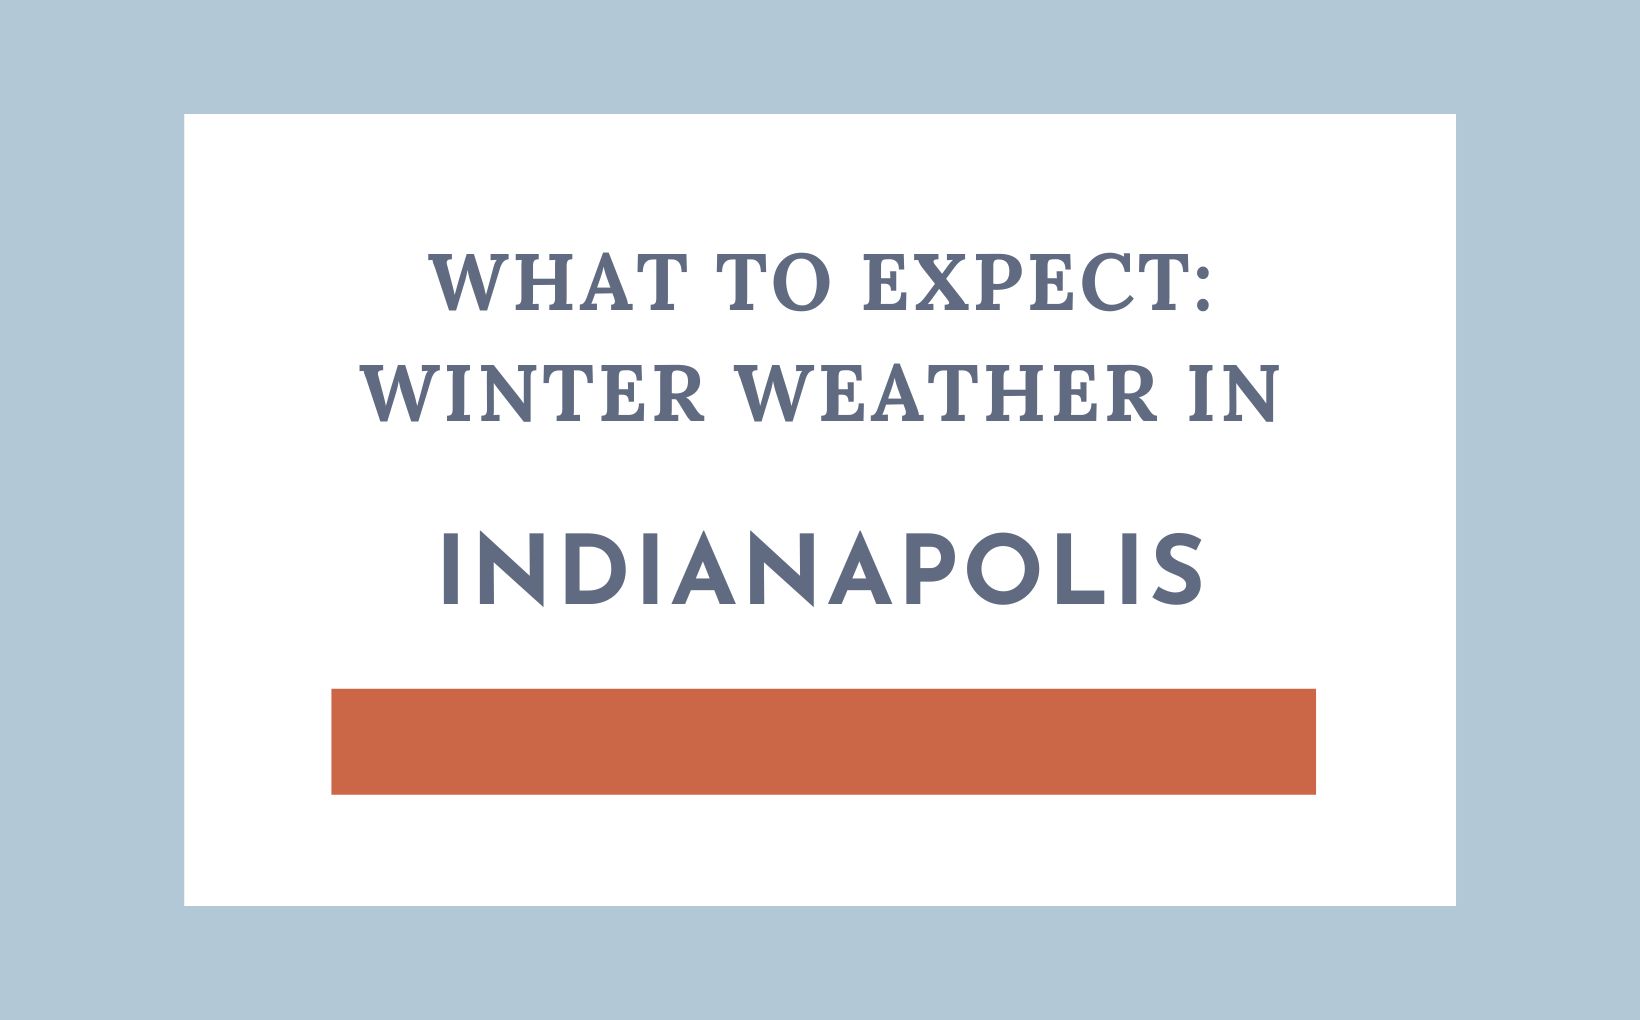 Winter weather in Indianapolis feature image